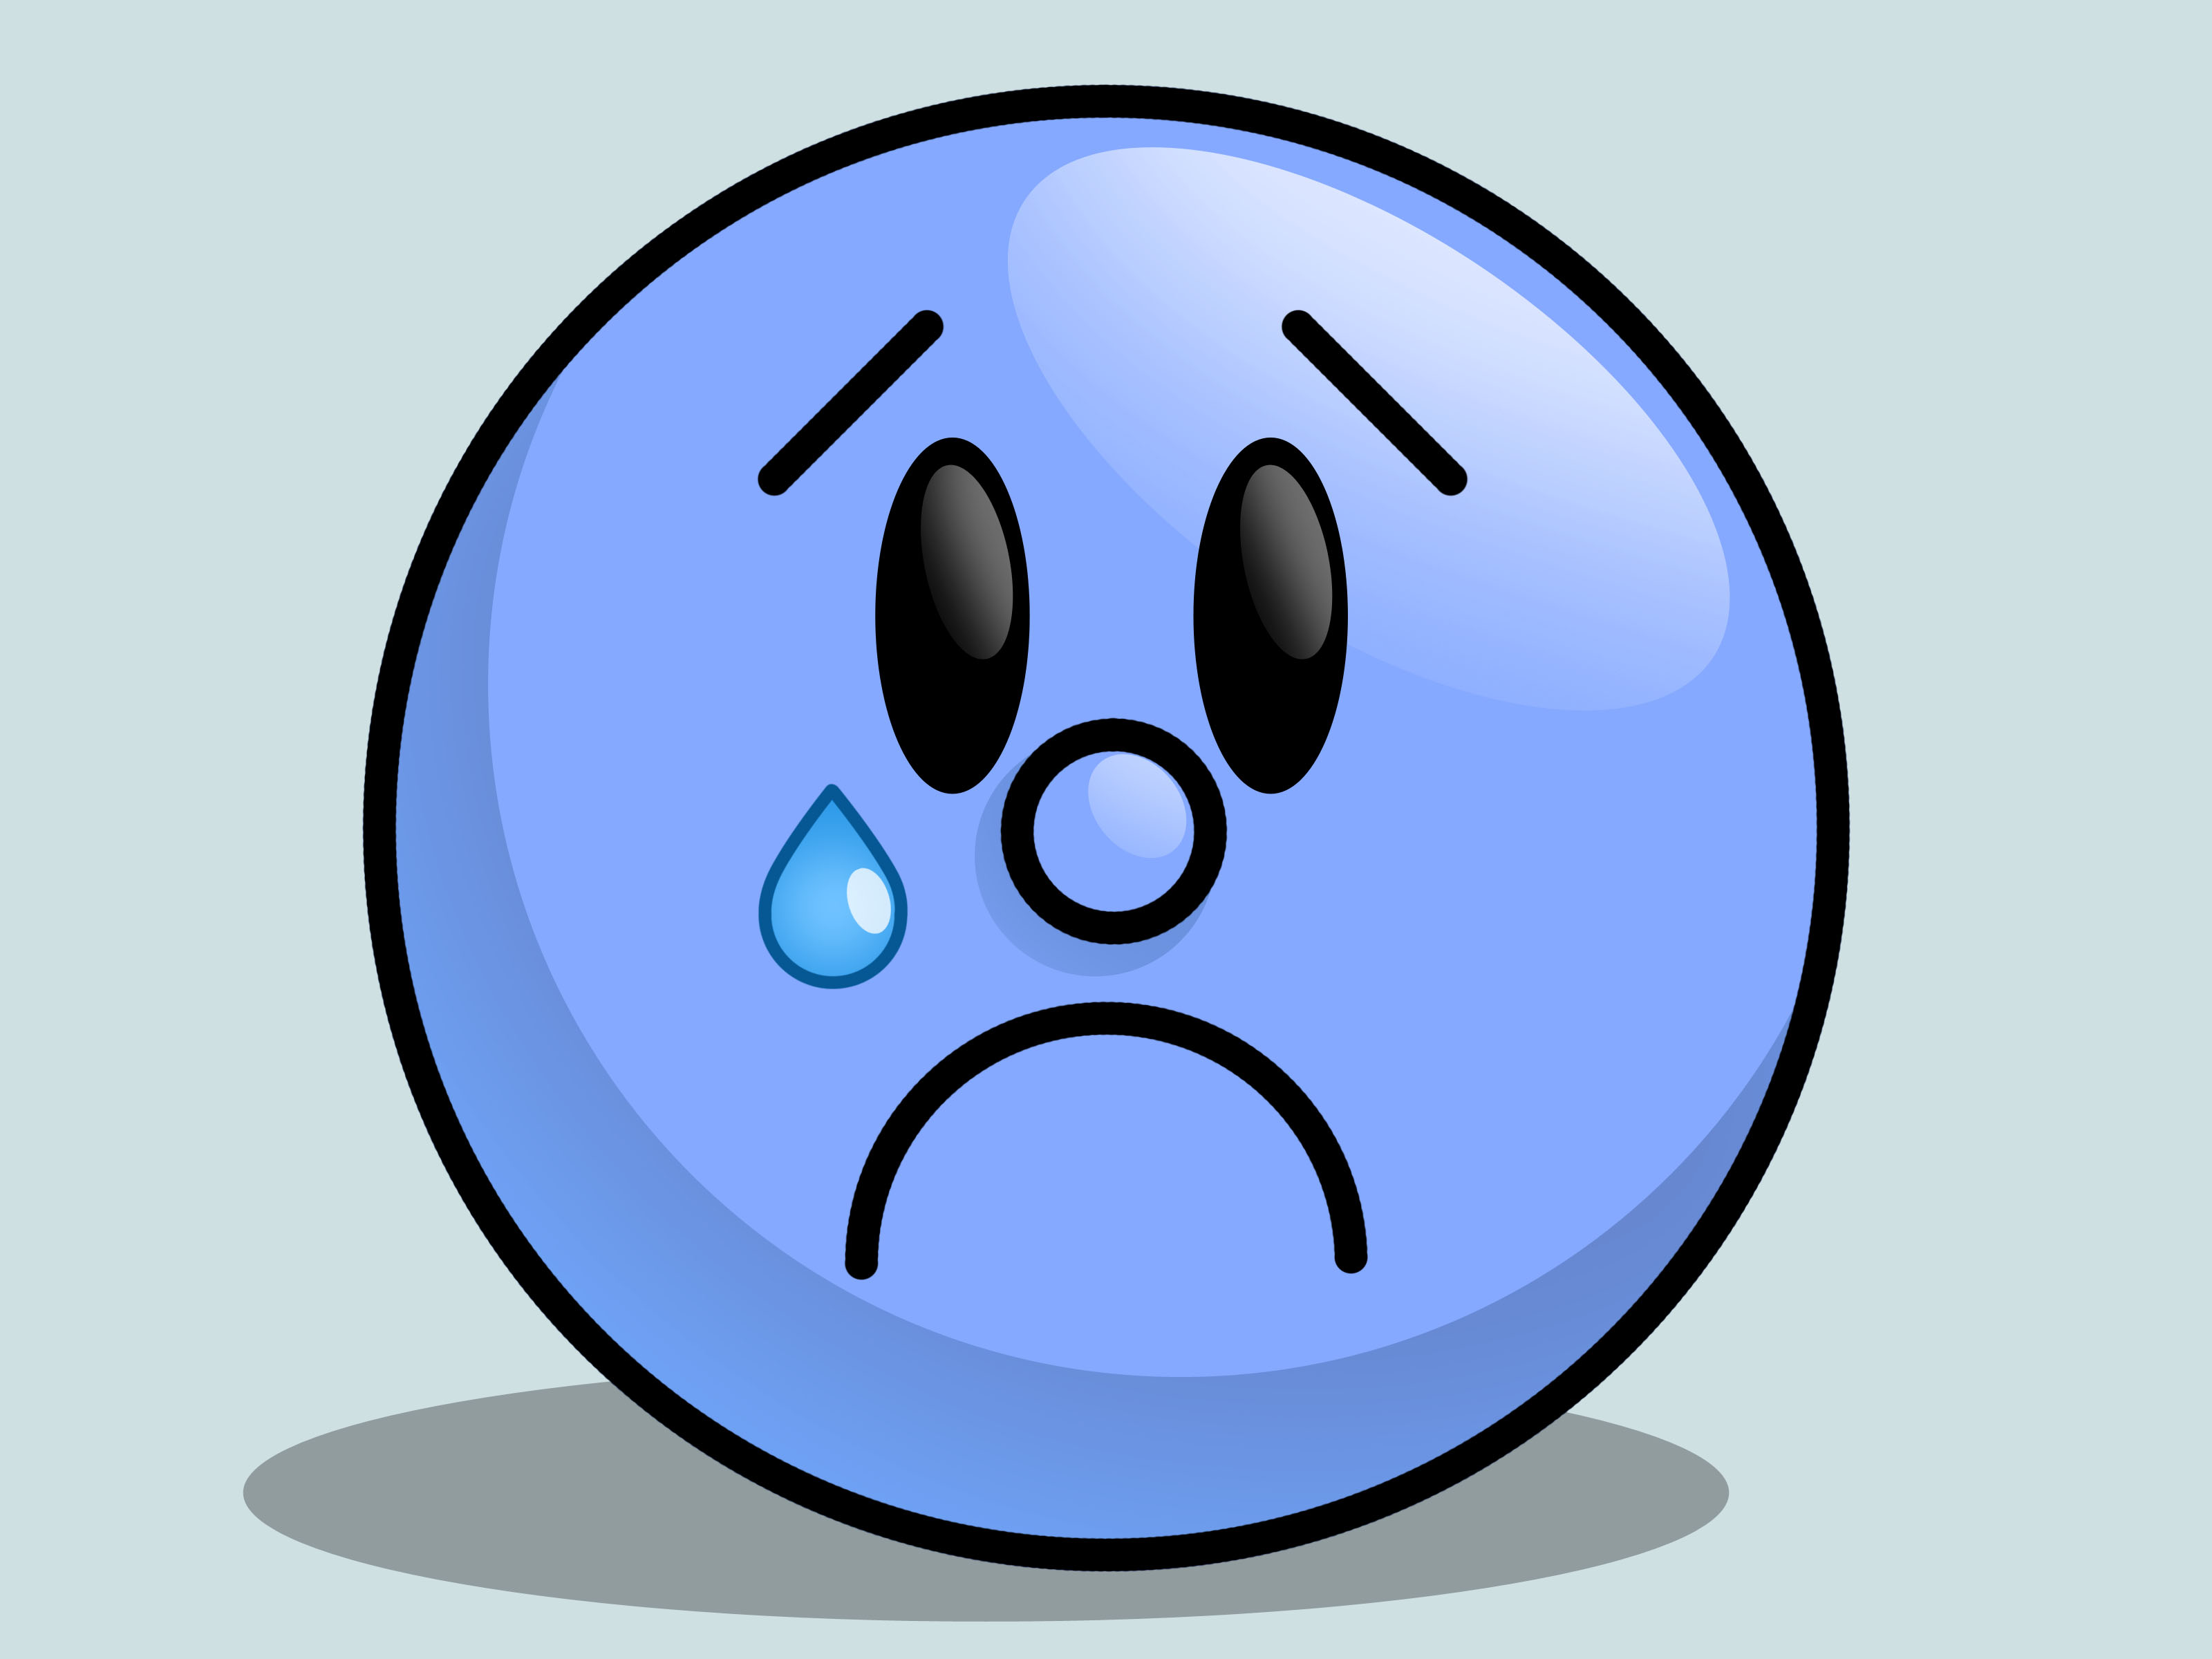 Blue Frowny Face Images & Pictures - Becuo